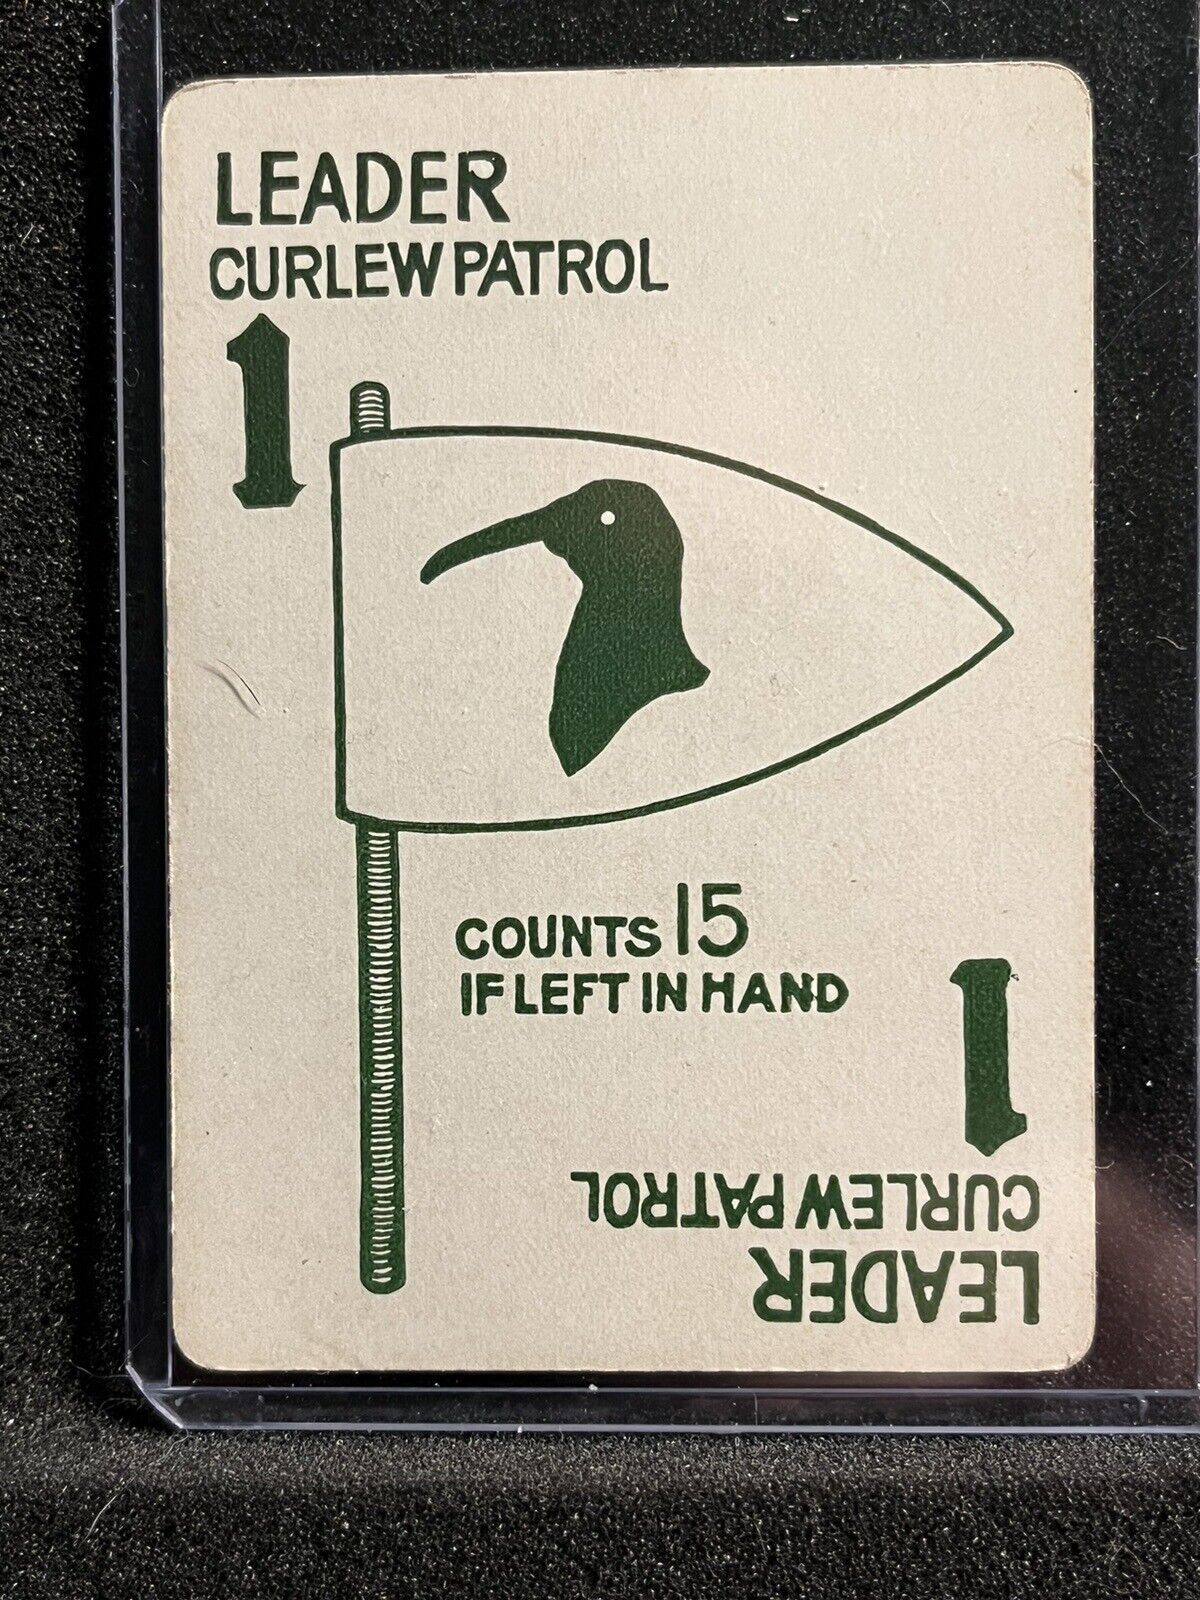 Vintage 1910’s Parker Brothers Boy Scout Playing Card #1 Leader Curlew Patrol